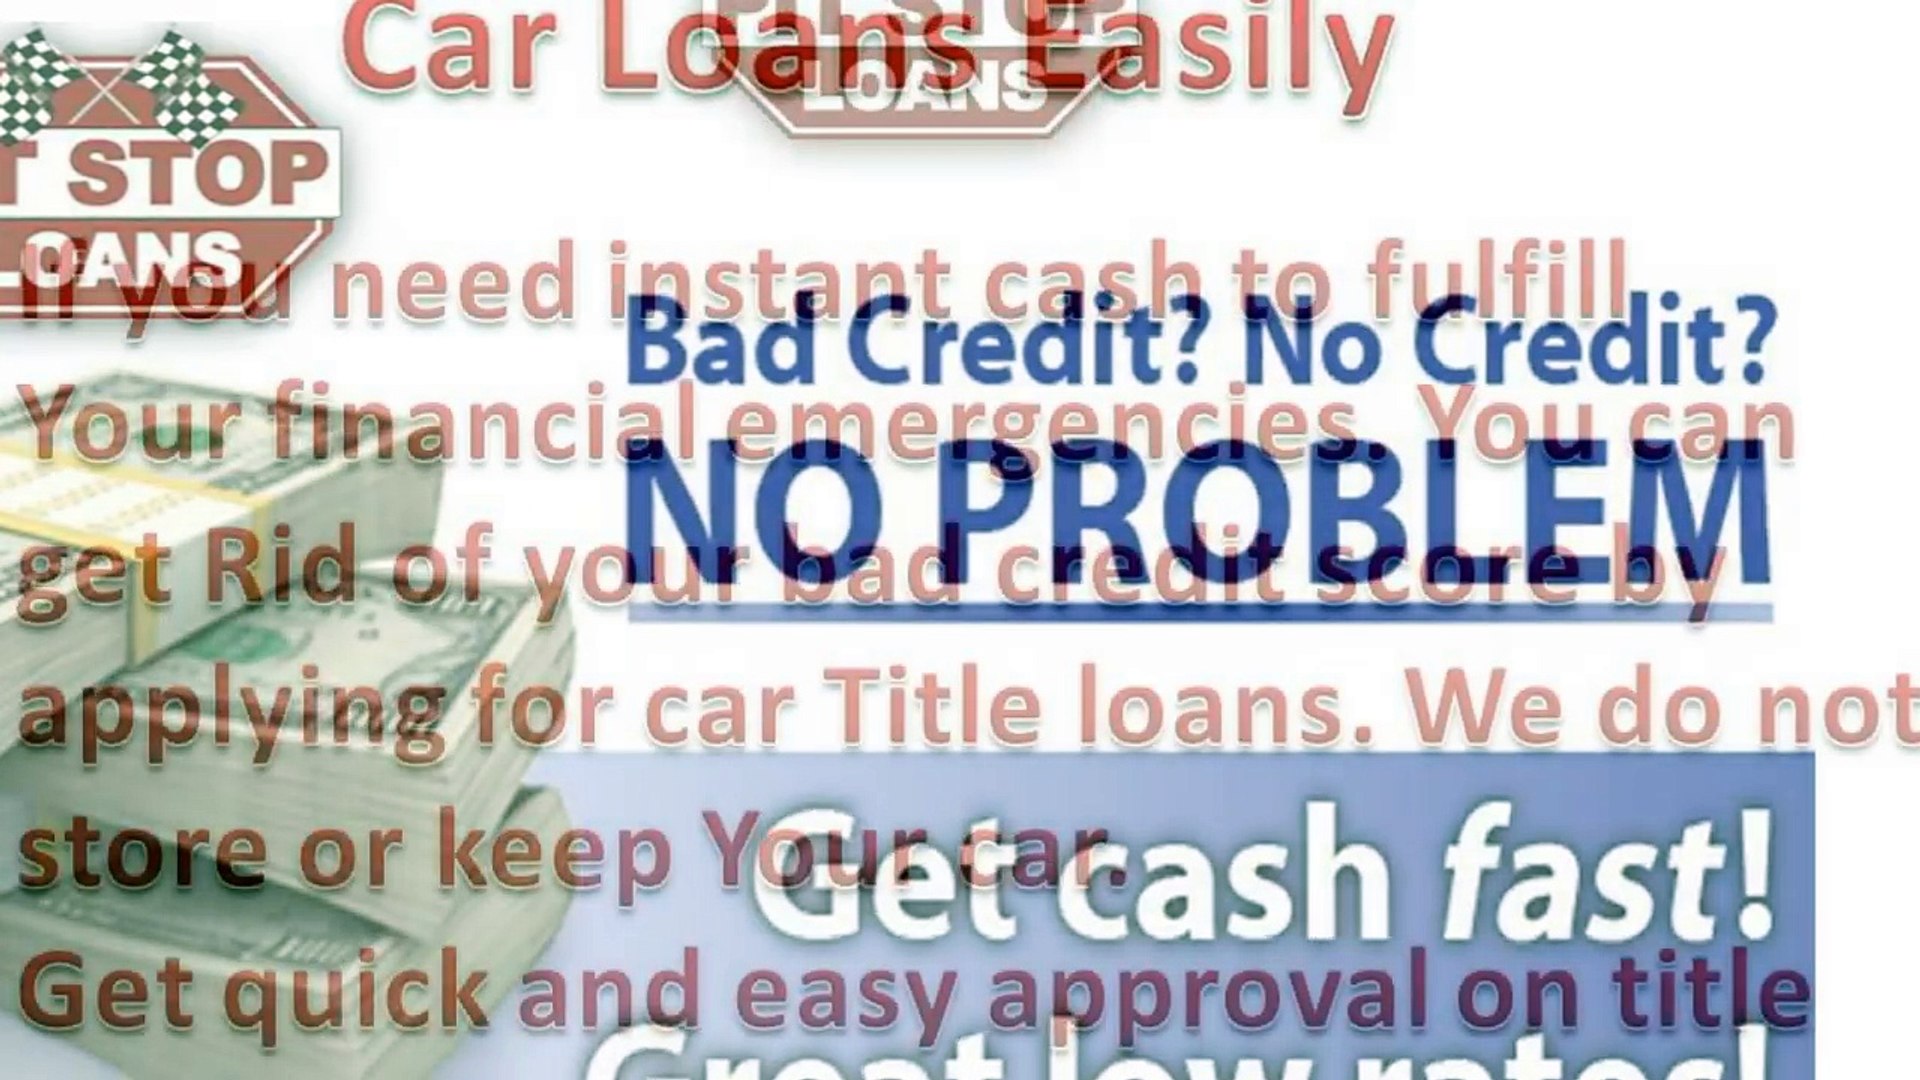 Easy and fast approval on bad credit car loans with Pit Stop Loans